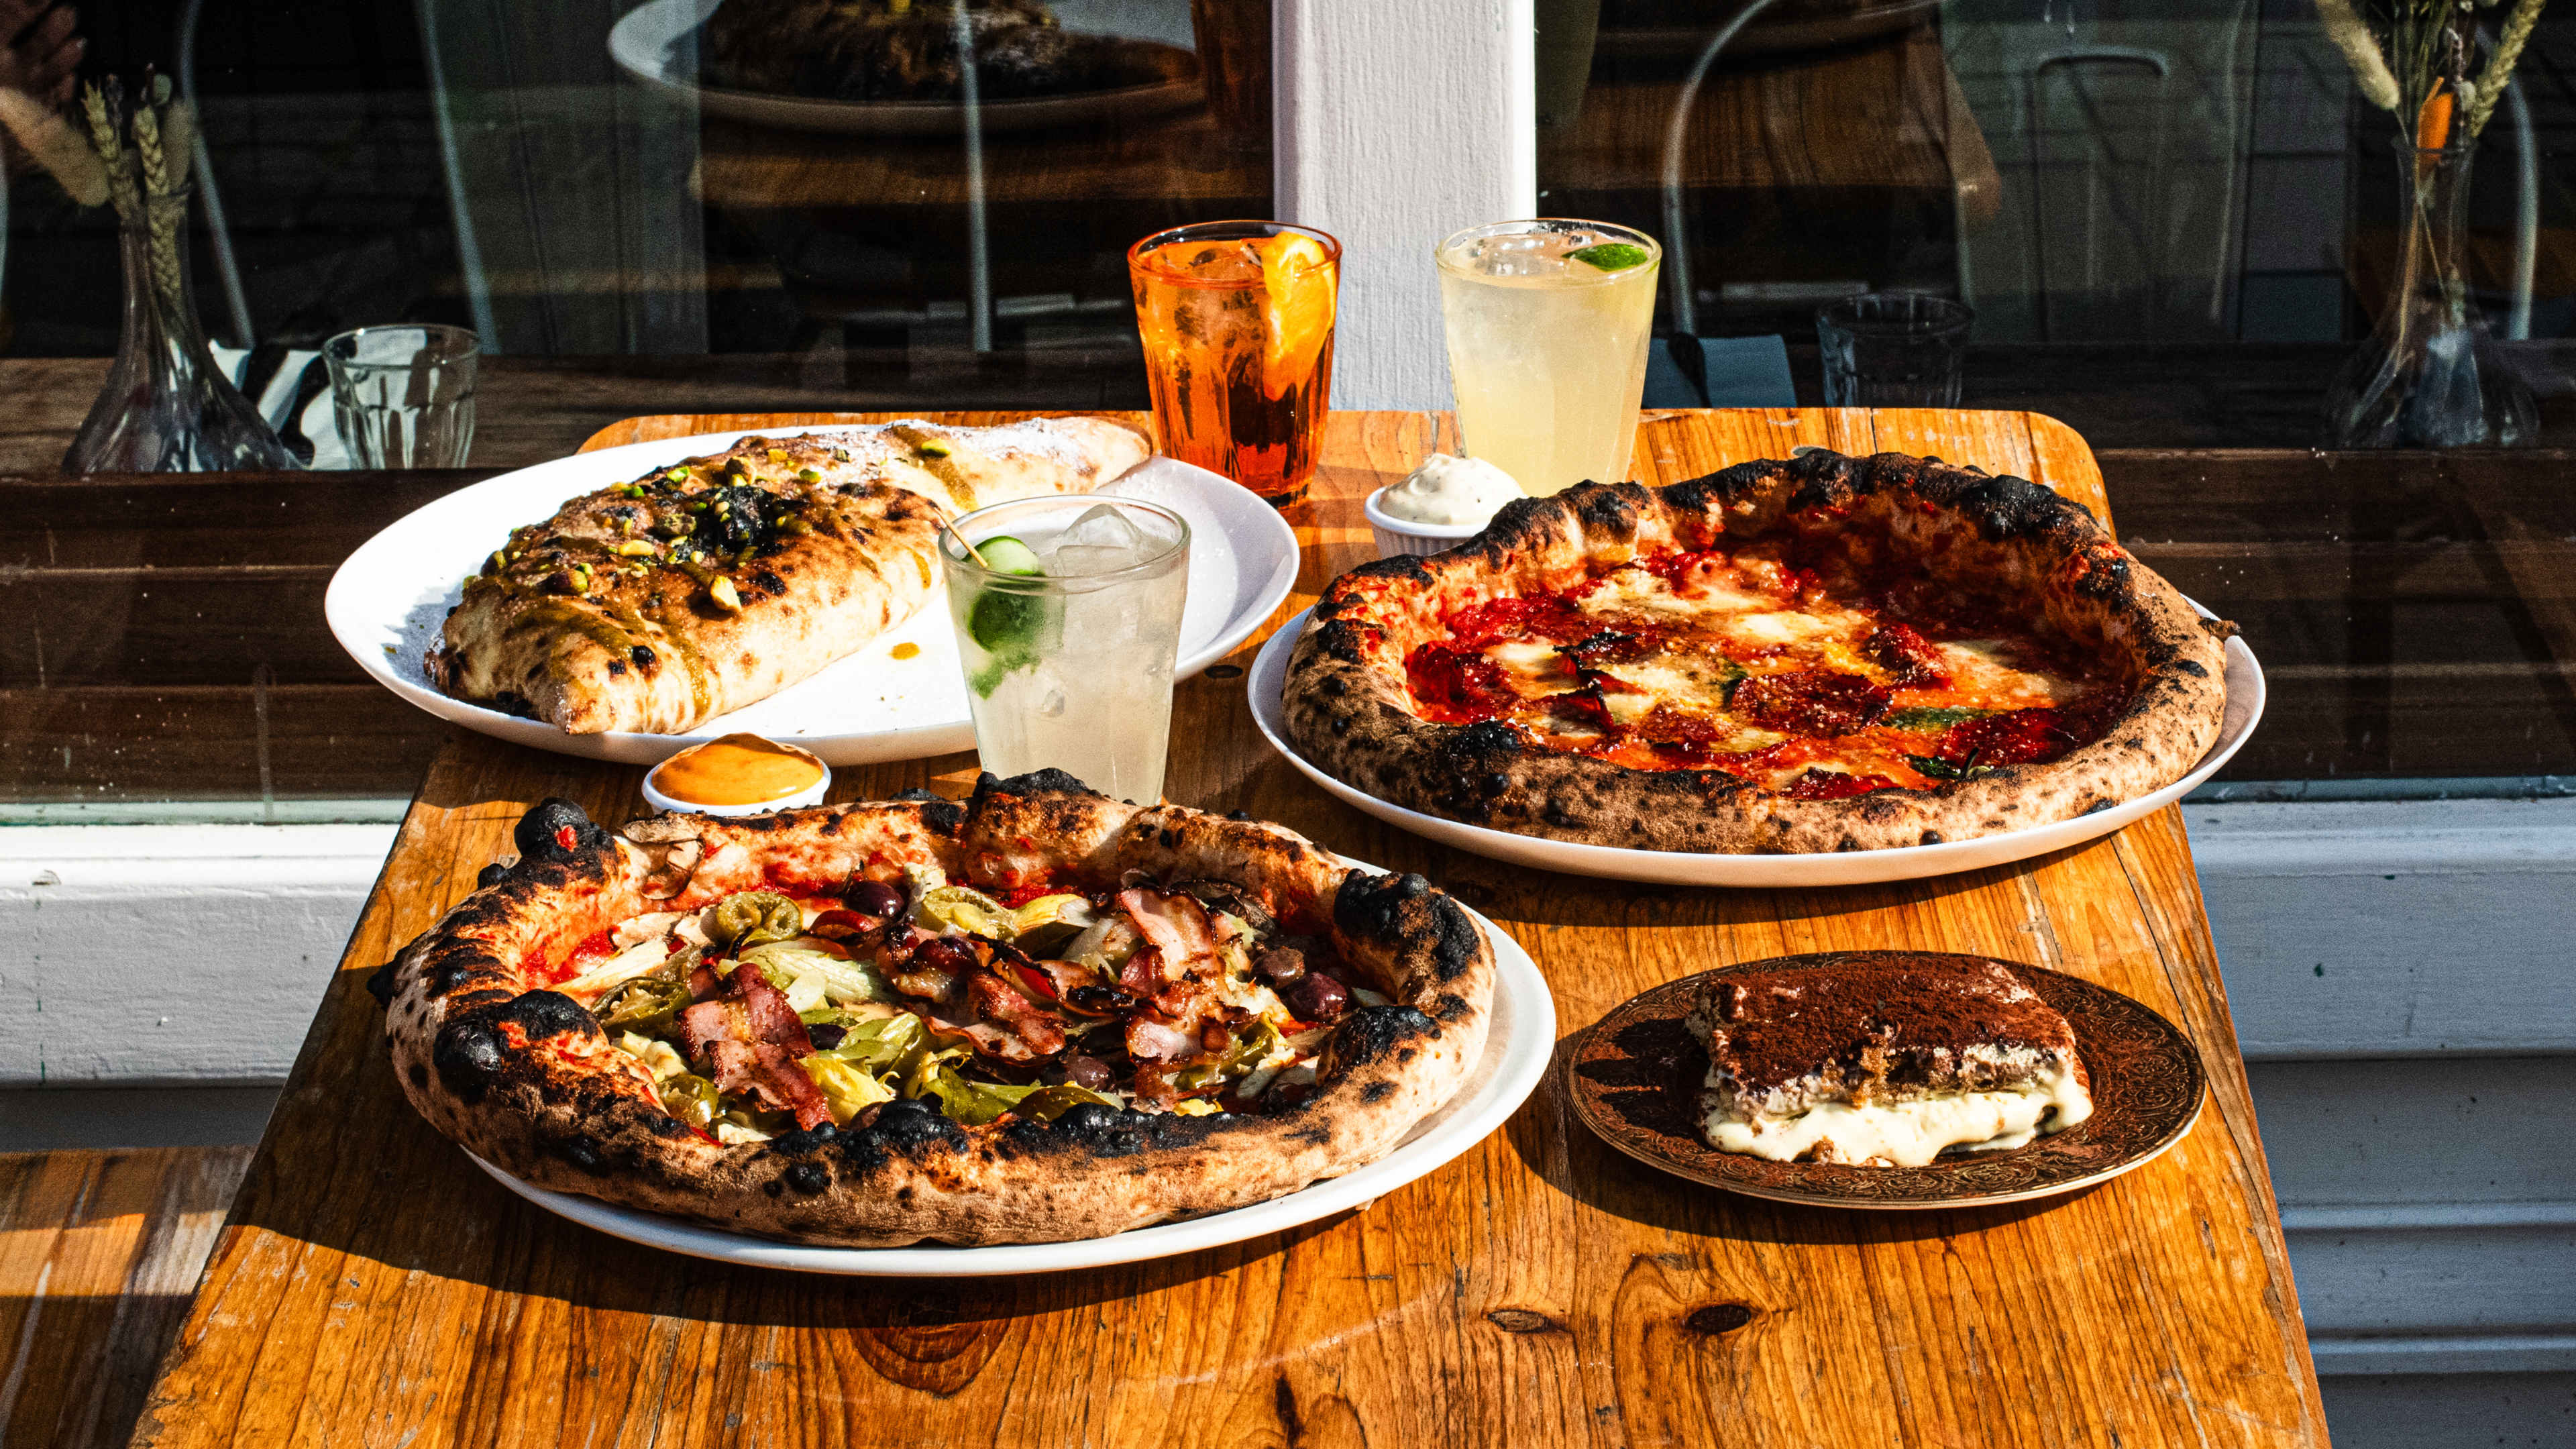 Two pizzas, a tiramisu, drinks, and a calzone on a wooden outside table in the sunshine.